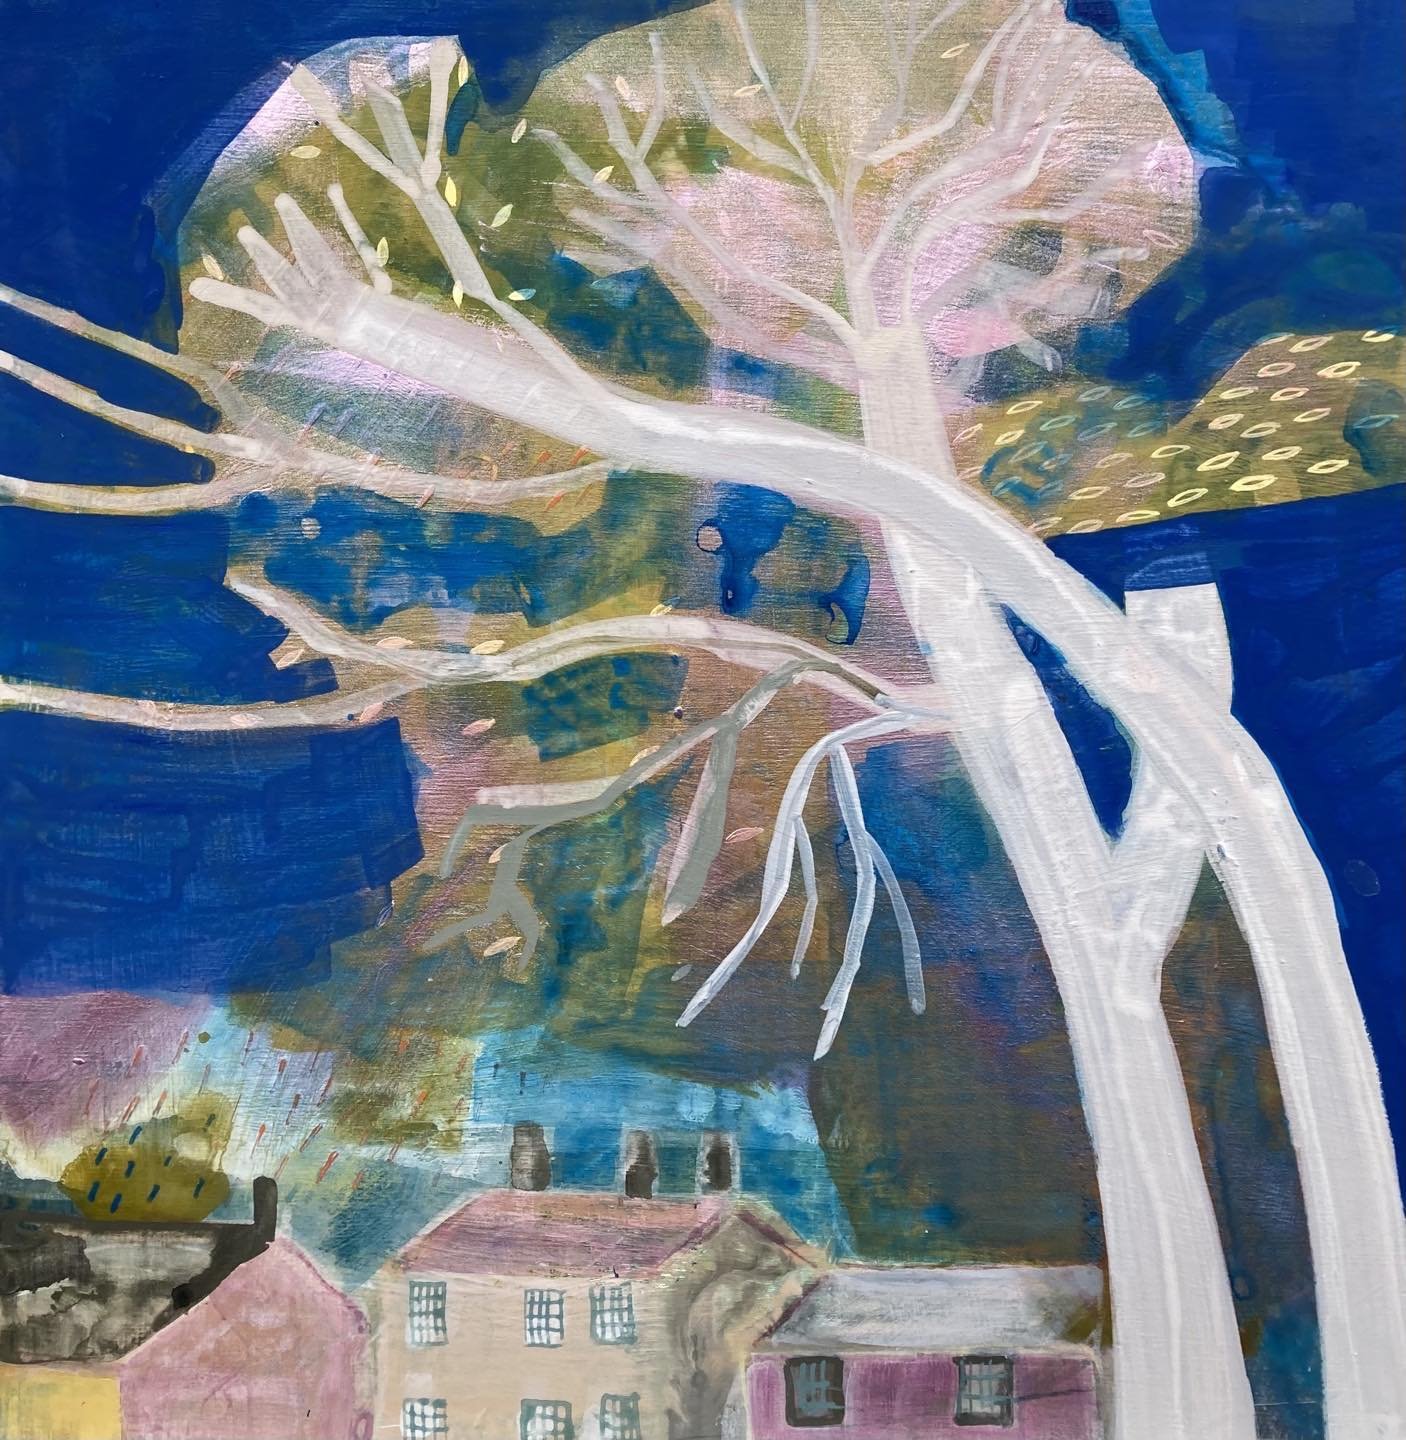 Big Tree, Little House

This painting inspired by Acklam, a beautiful village in Cumbria has huge towering plane trees that dwarf the houses. Power to the trees! Big tree, Little House went all the way to America.

#treehugger #treehuggersunite #tree